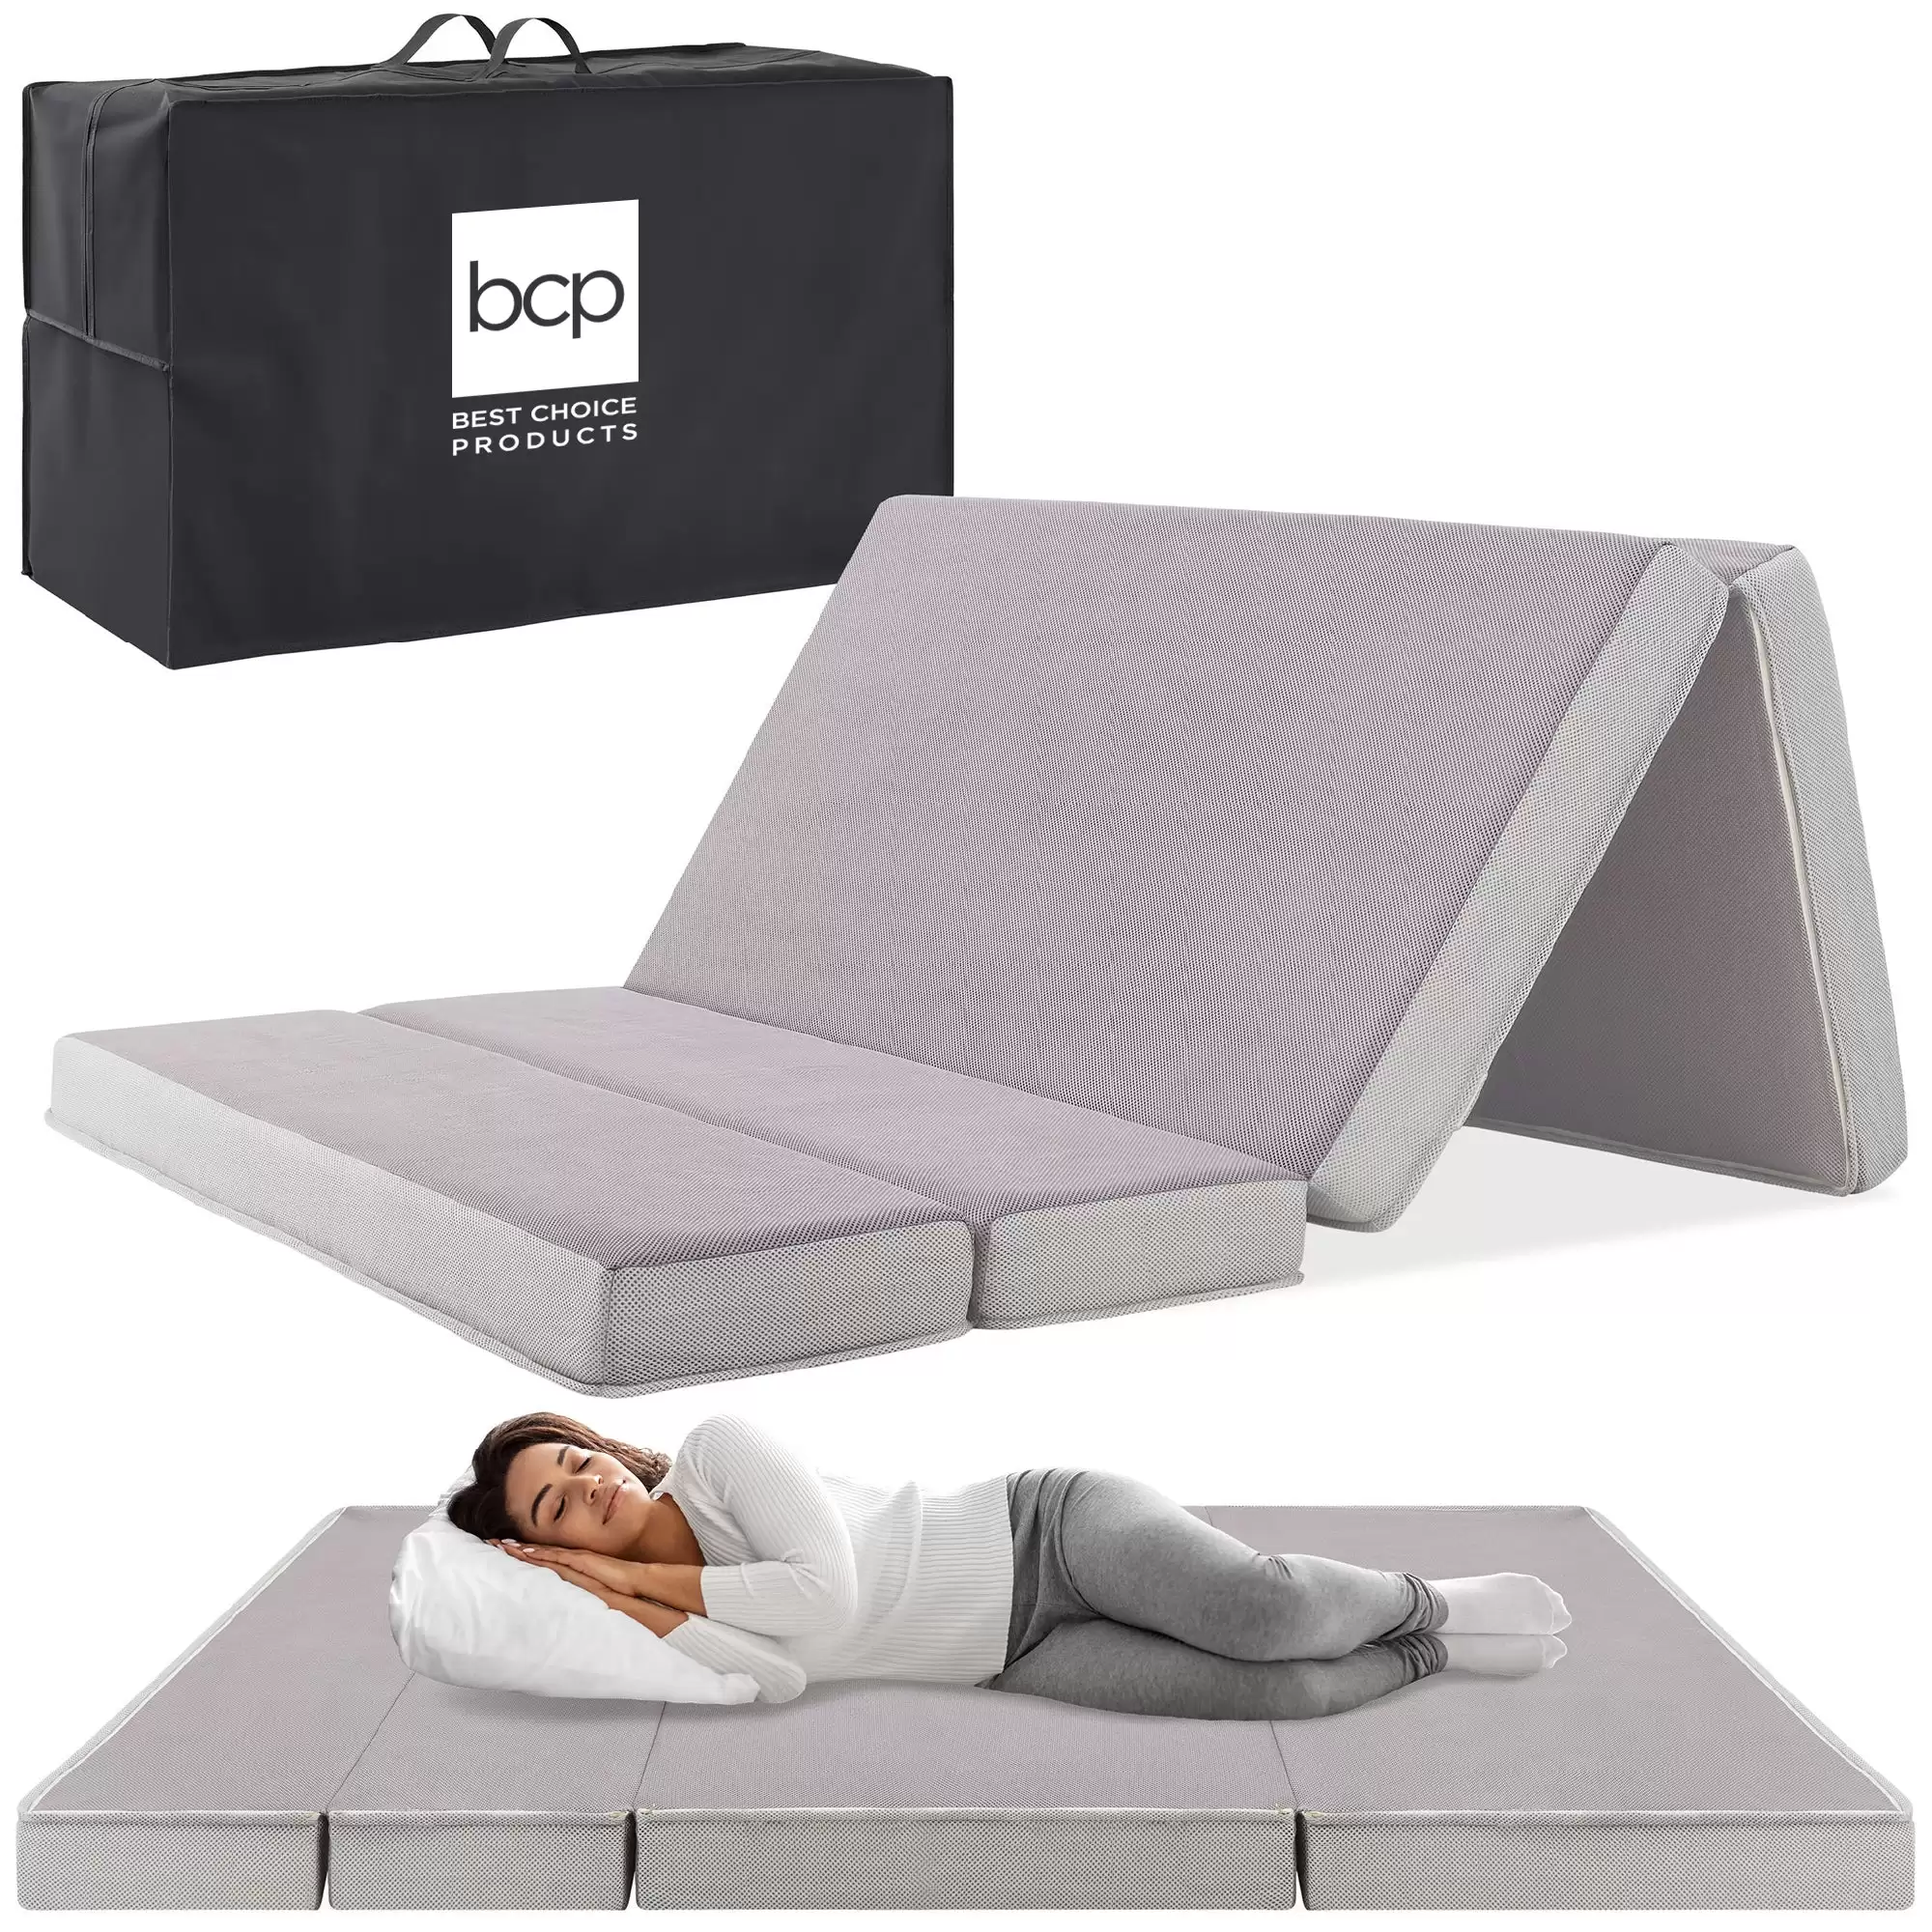 Starting At $89.99 Folding Portable Gray Mattress Topper W/ Plush Foam With This Bestchoiceproducts Discount Voucher